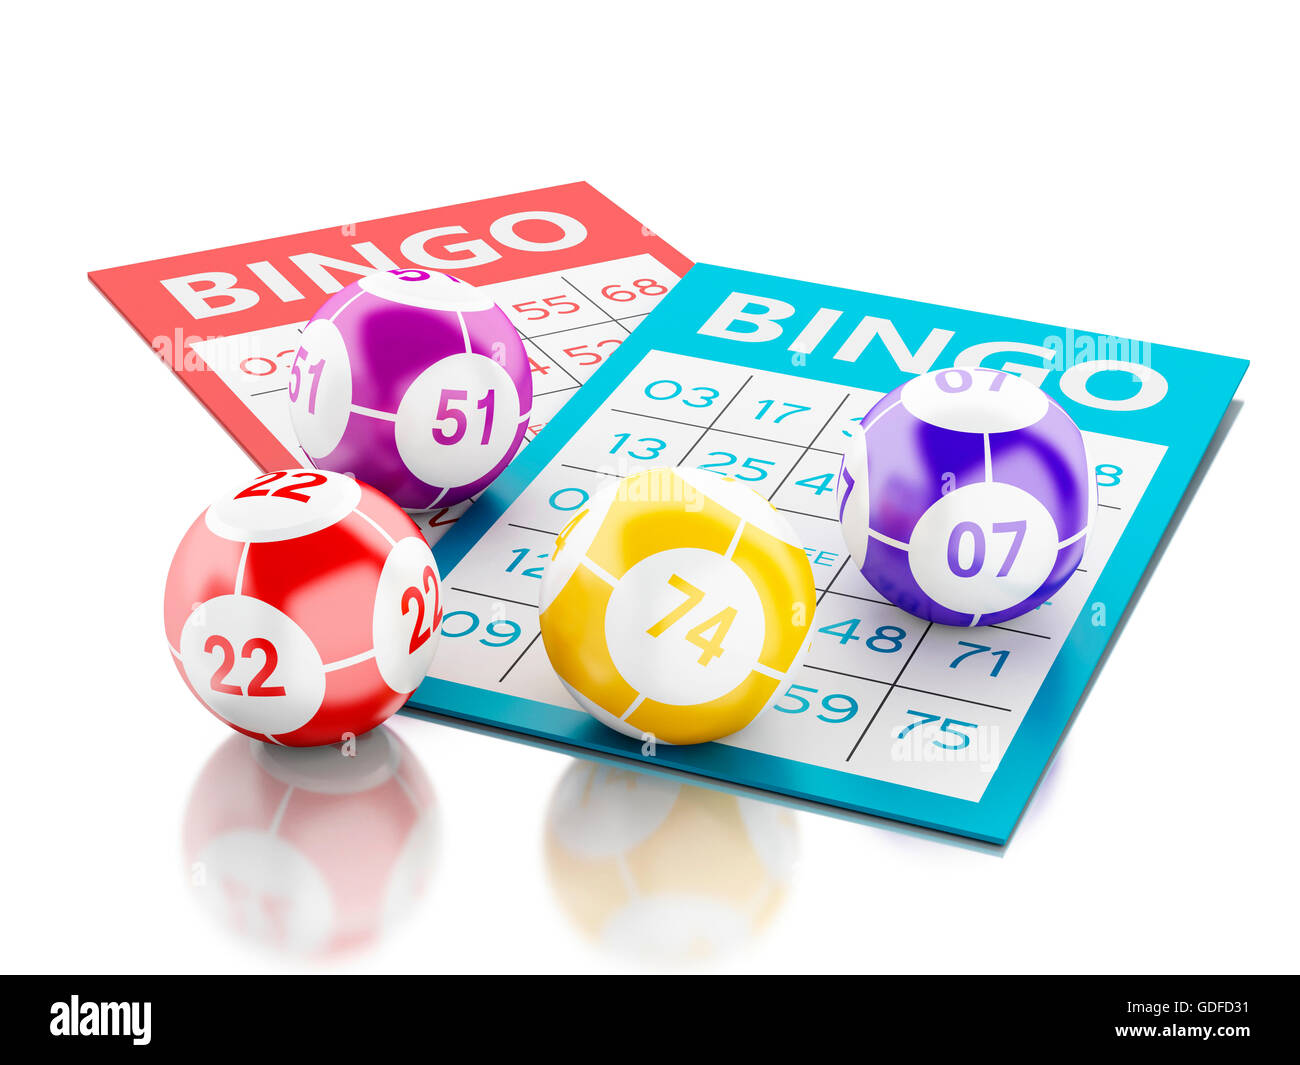 3d renderer image. Bingo cards with colorful bingo balls. Isolated white background. Stock Photo